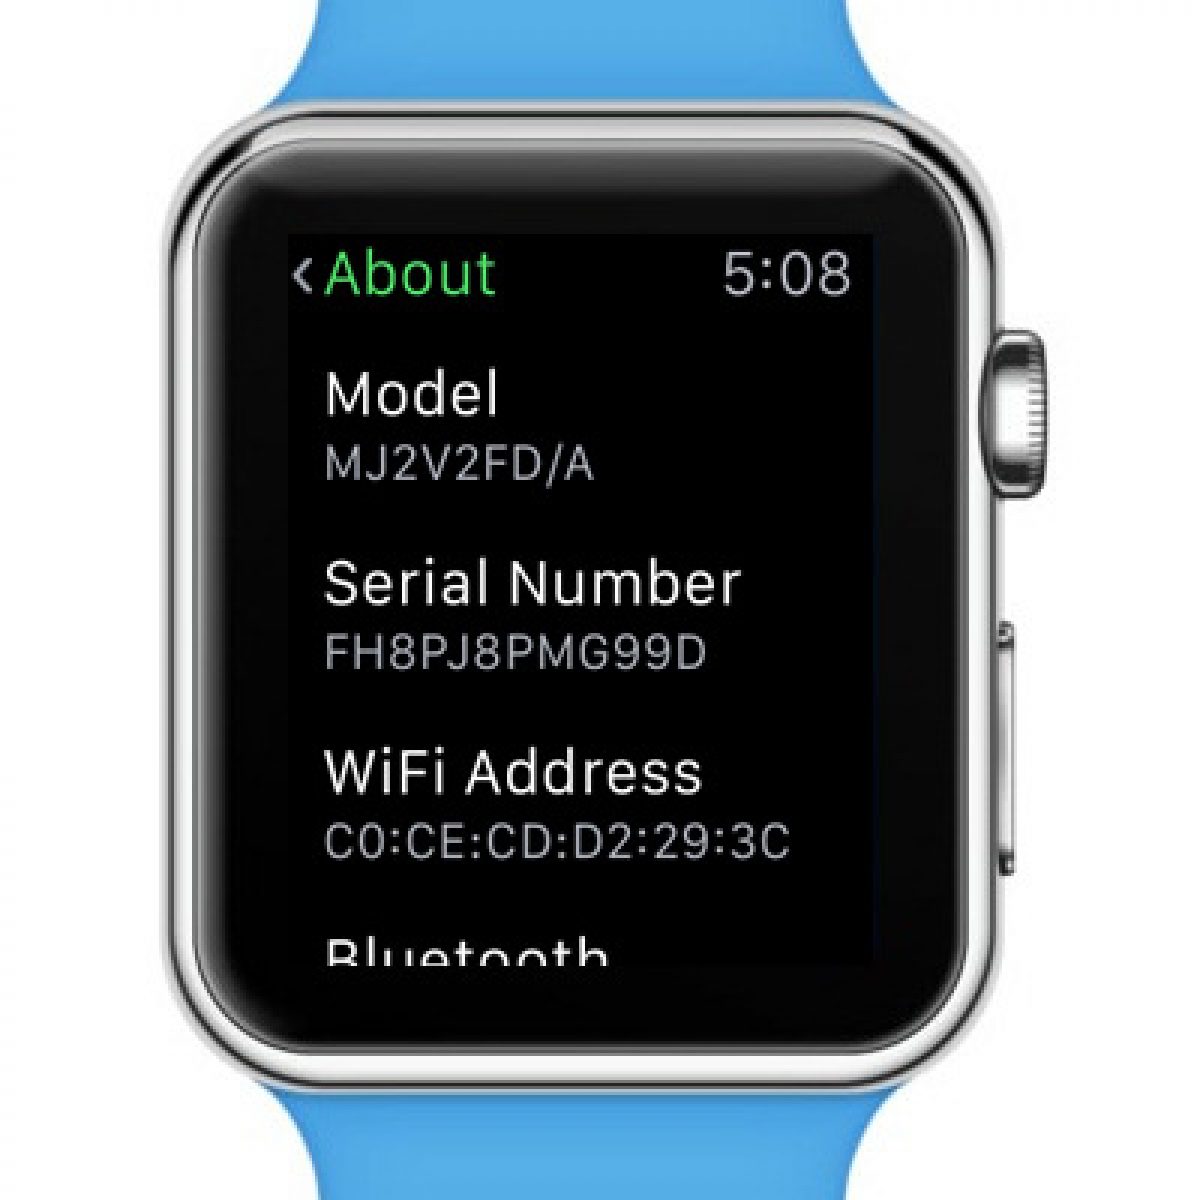 How To Find Imei On Apple Watch